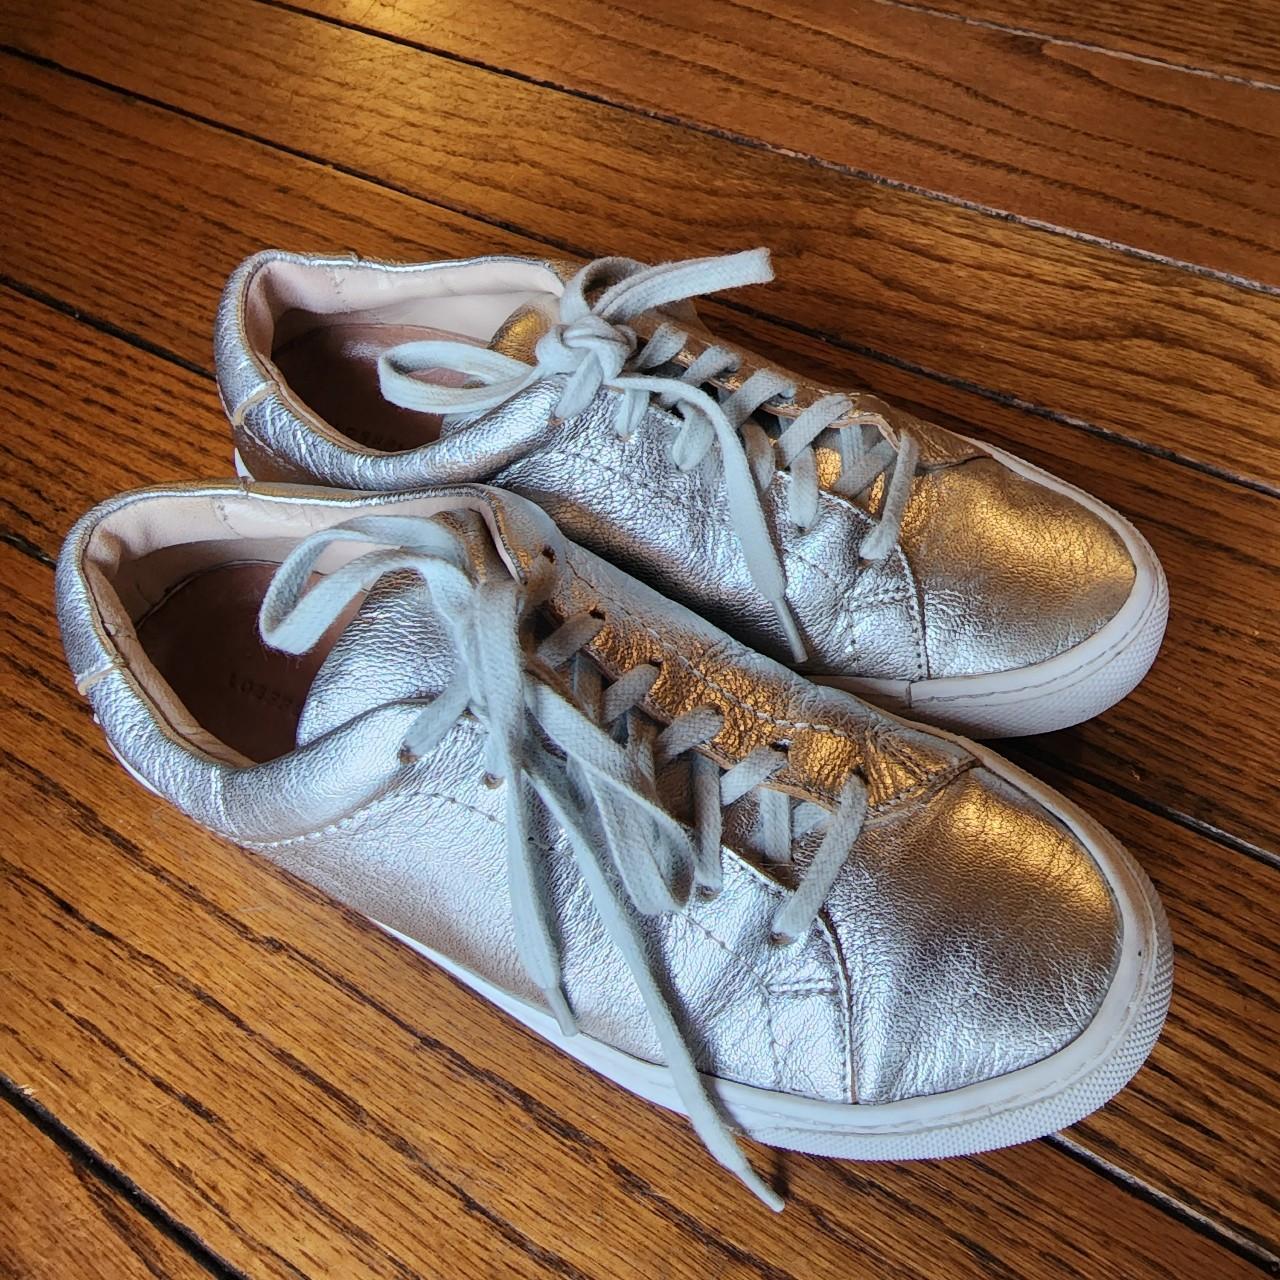 Loeffler Randall Tie dye Sneakers Size 10 - $90 (64% Off Retail) - From  Carly